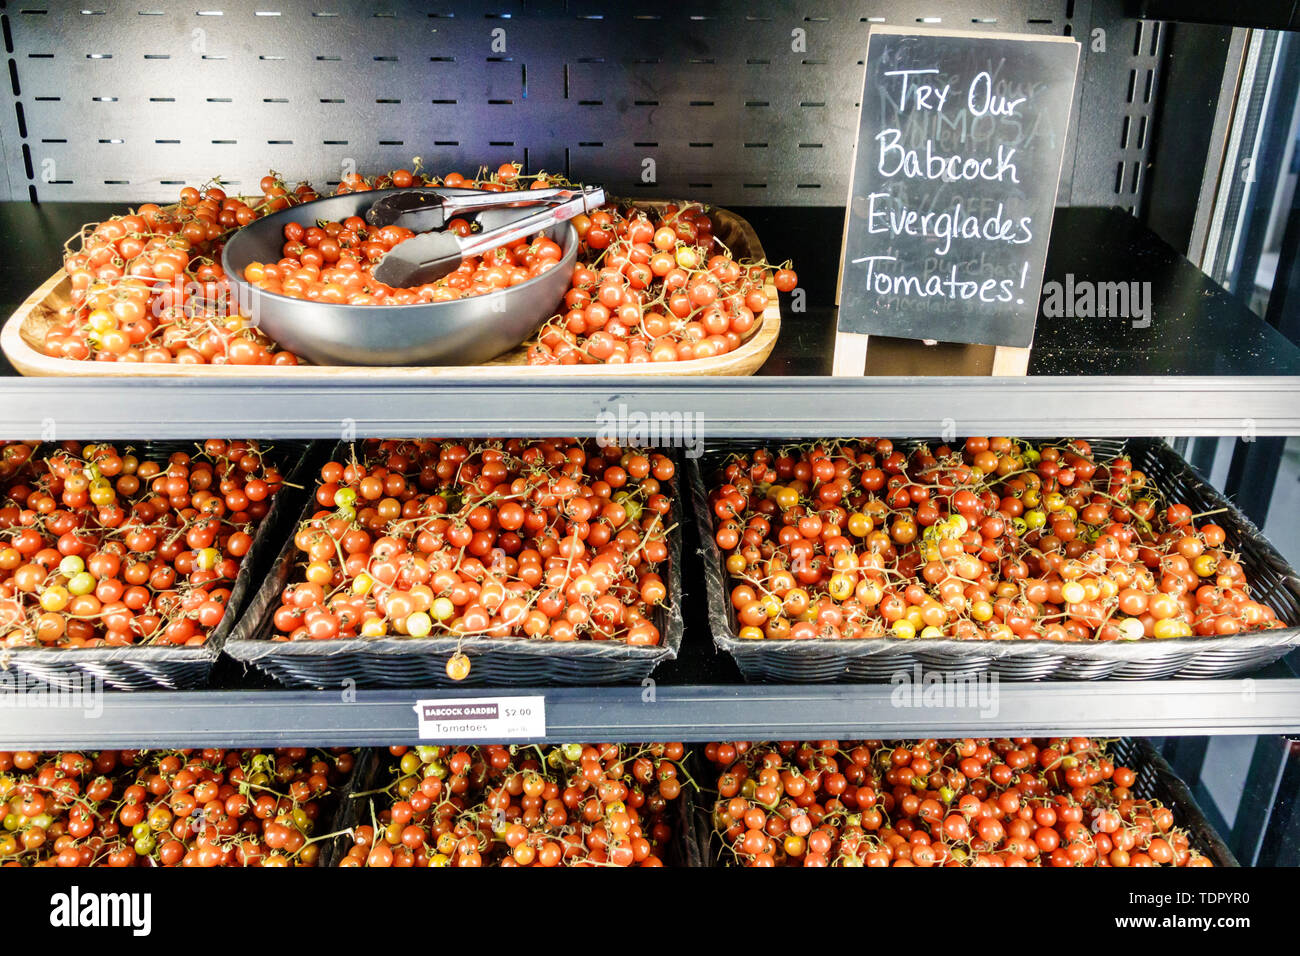 Babcock Ranch Florida,master planned community first solar-powered city,Slater’s Goods & Provisions,market,Everglades tomato,currant tomato,wild nativ Stock Photo